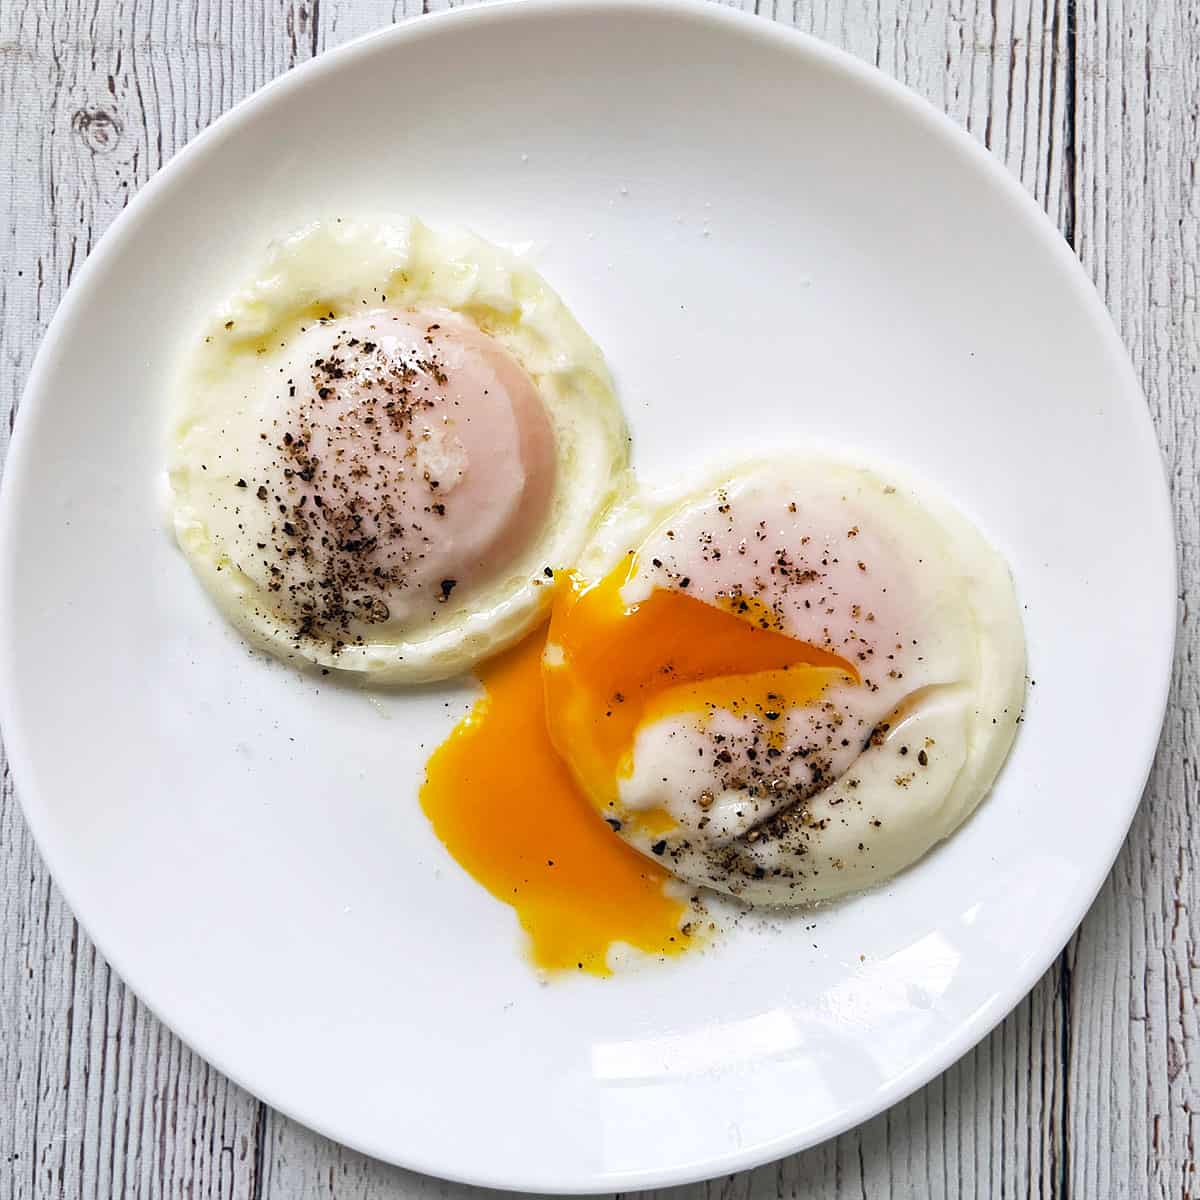 Two eggs that were poached in a stovetop egg poacher for three minutes.